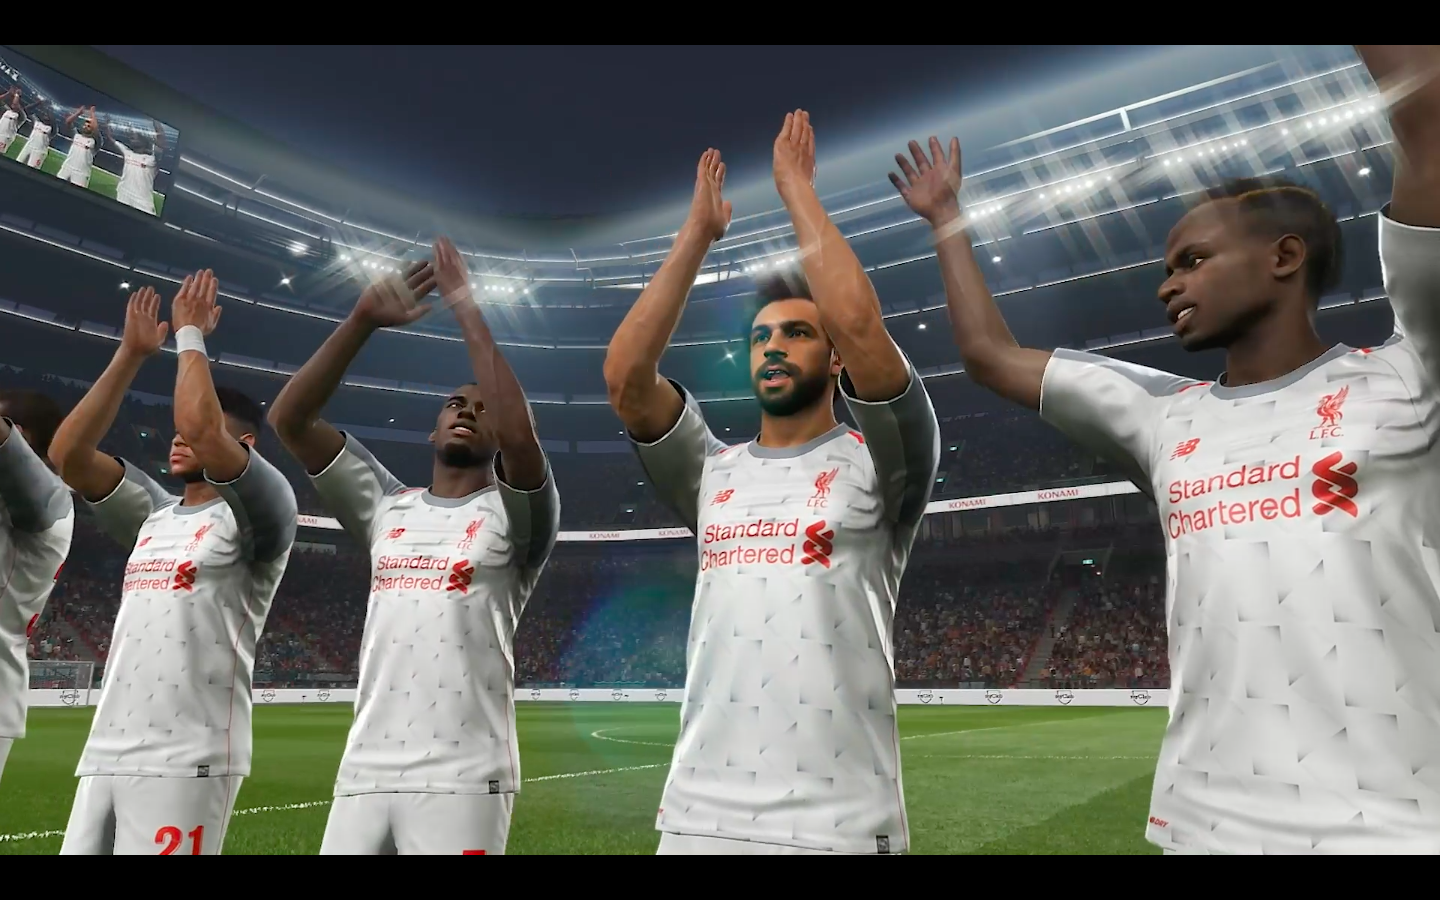 Out now: Play as LFC at Anfield in the all-new PES 2017 - Liverpool FC